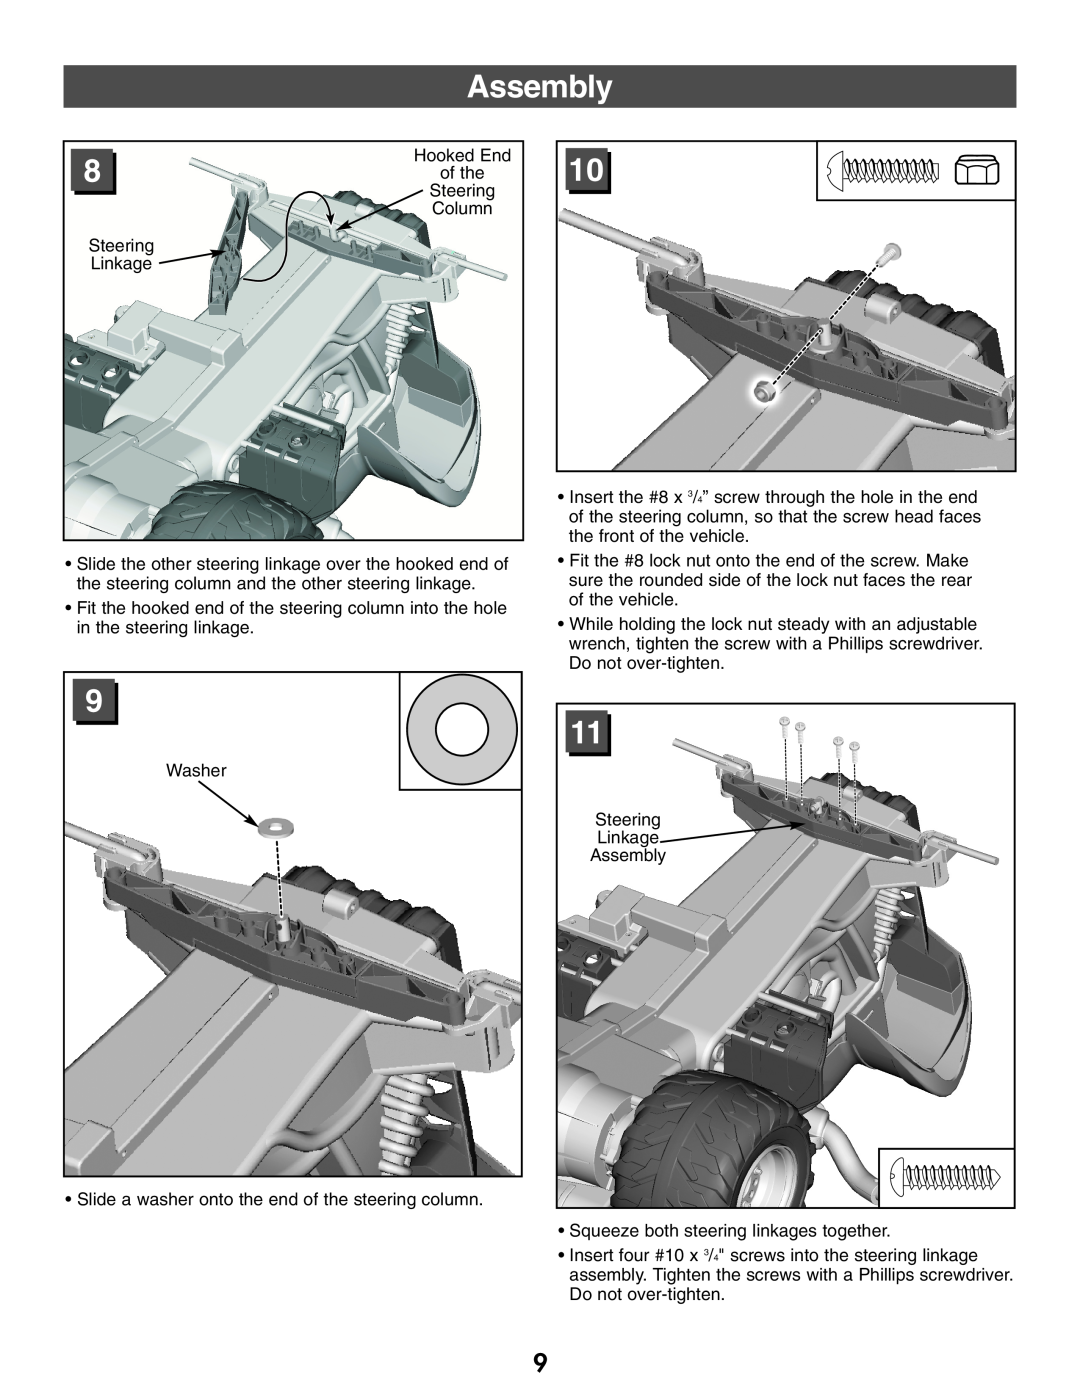 Kawasaki B9272 owner manual Assembly, Hooked End 8of the Steering Column Steering Linkage 